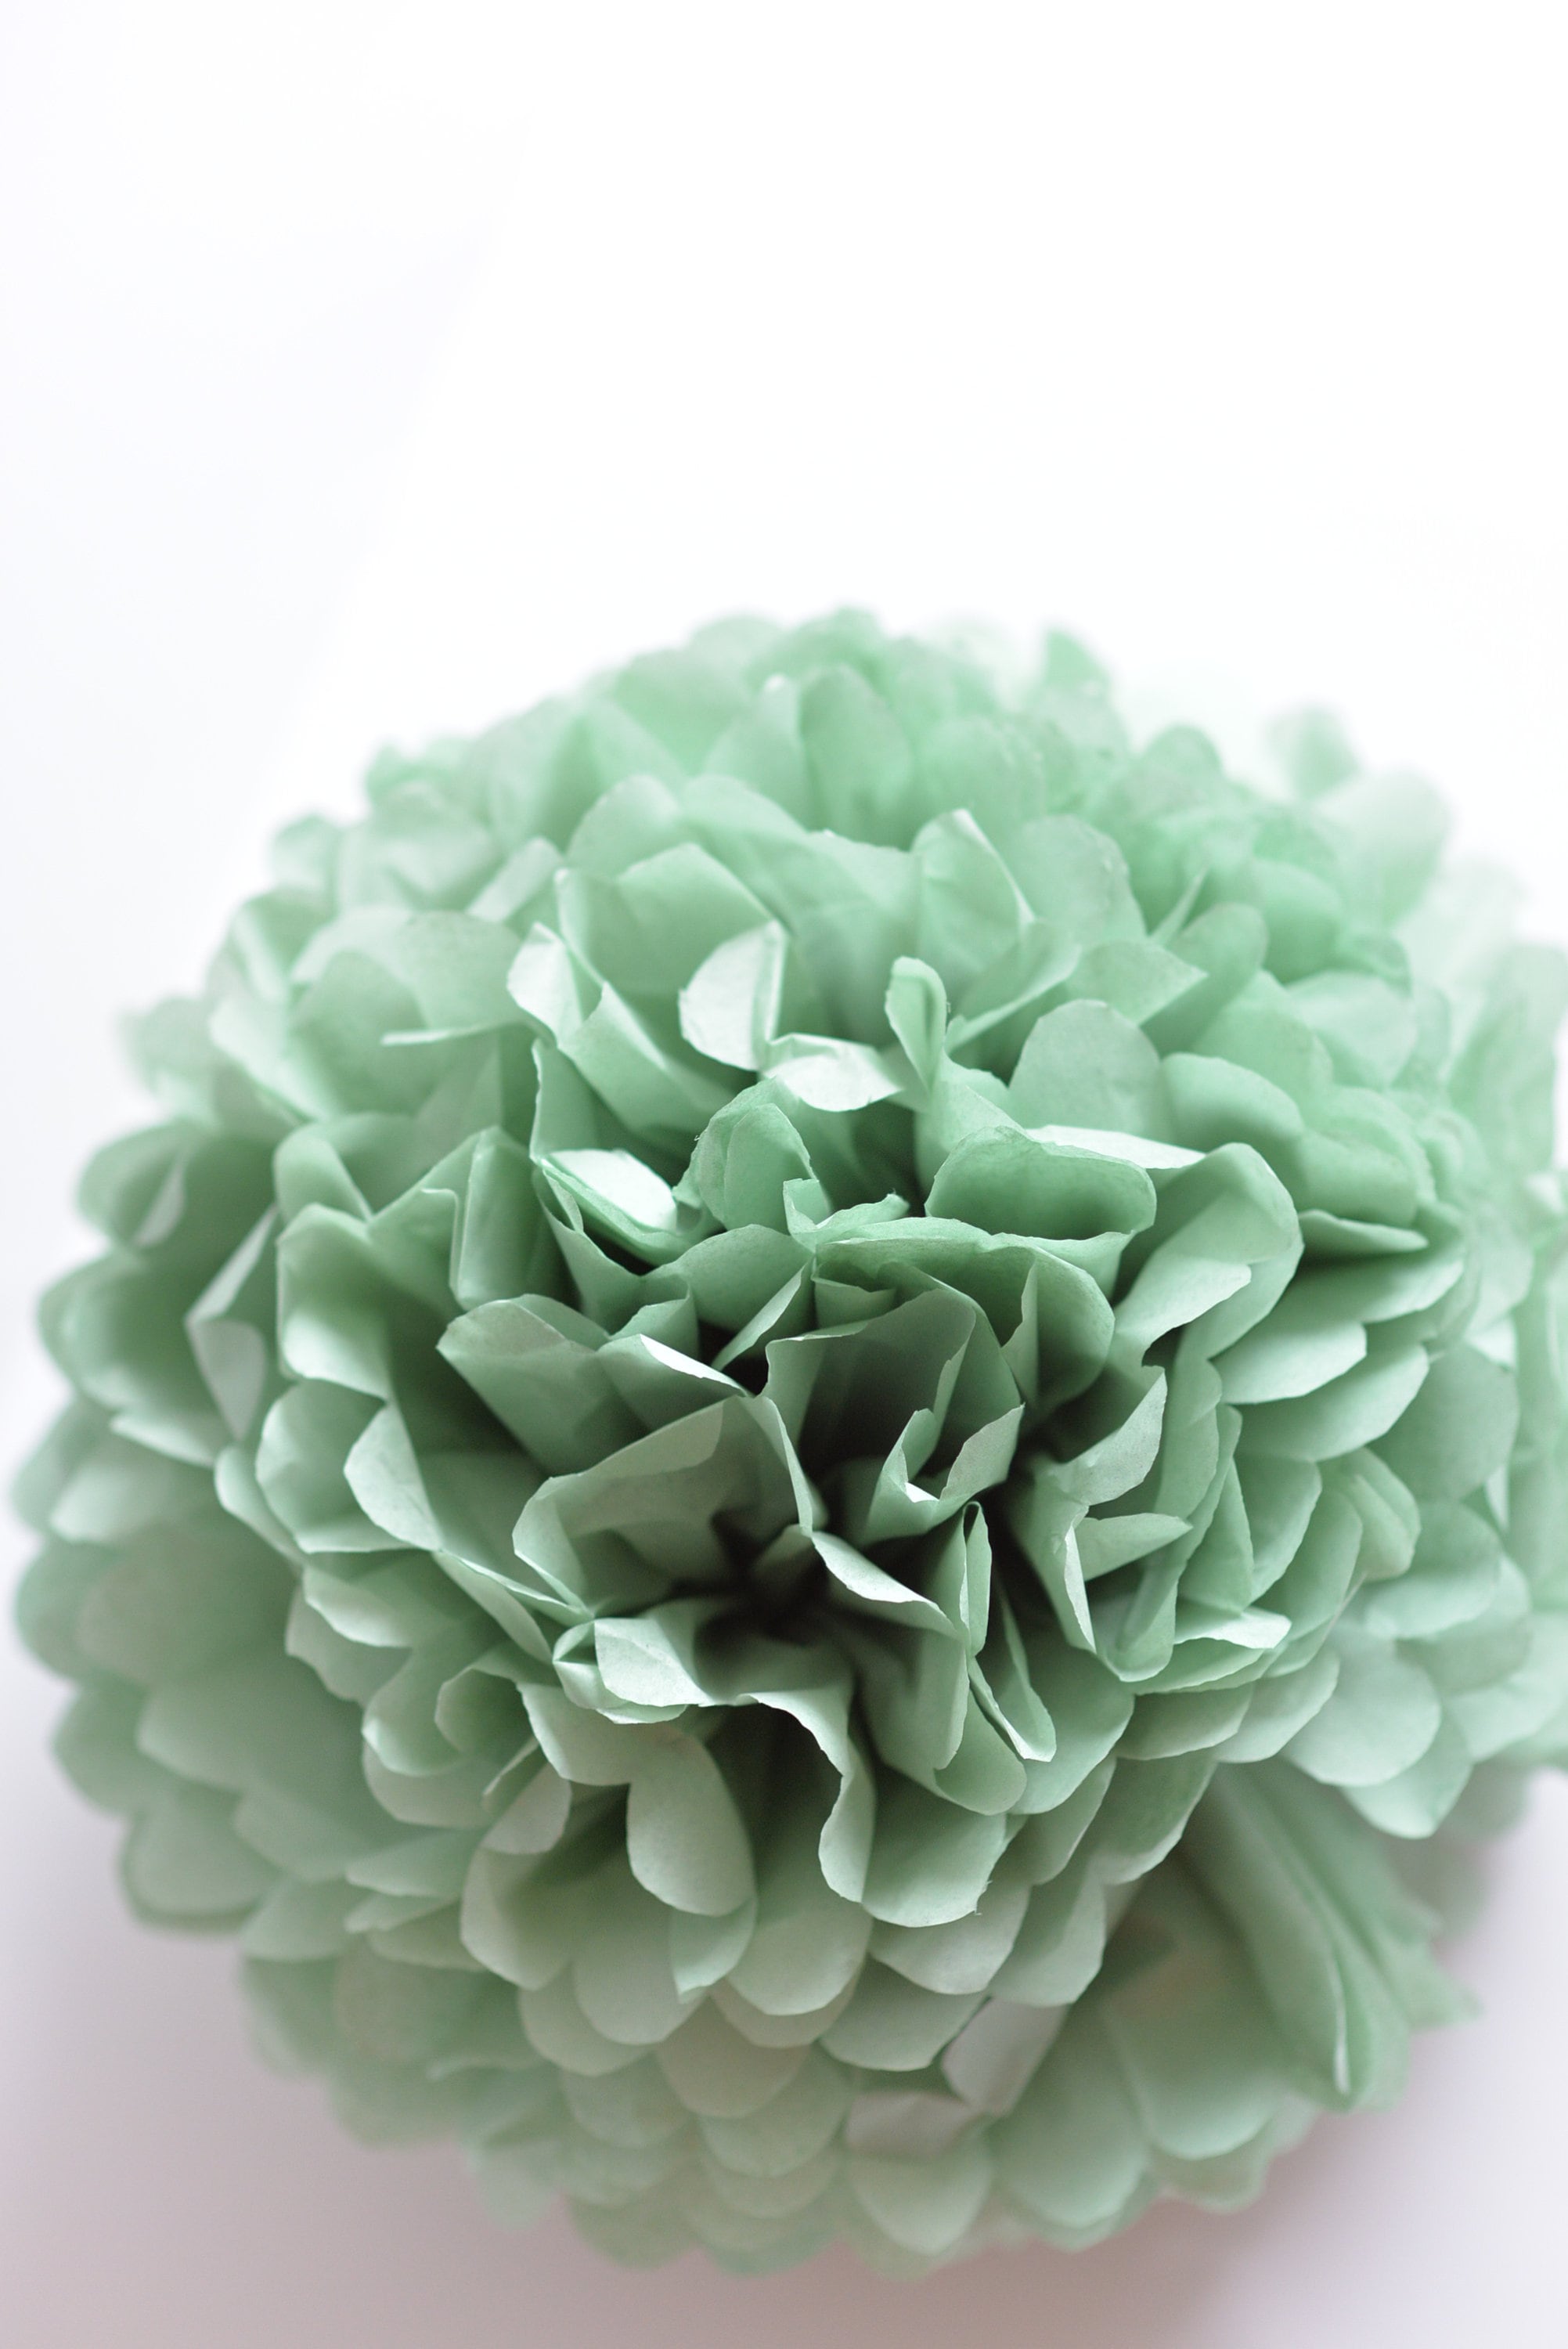 Rose Gold and Sage Green Tissue Paper Pom Poms Party Decorations Olive  Dusty Pin